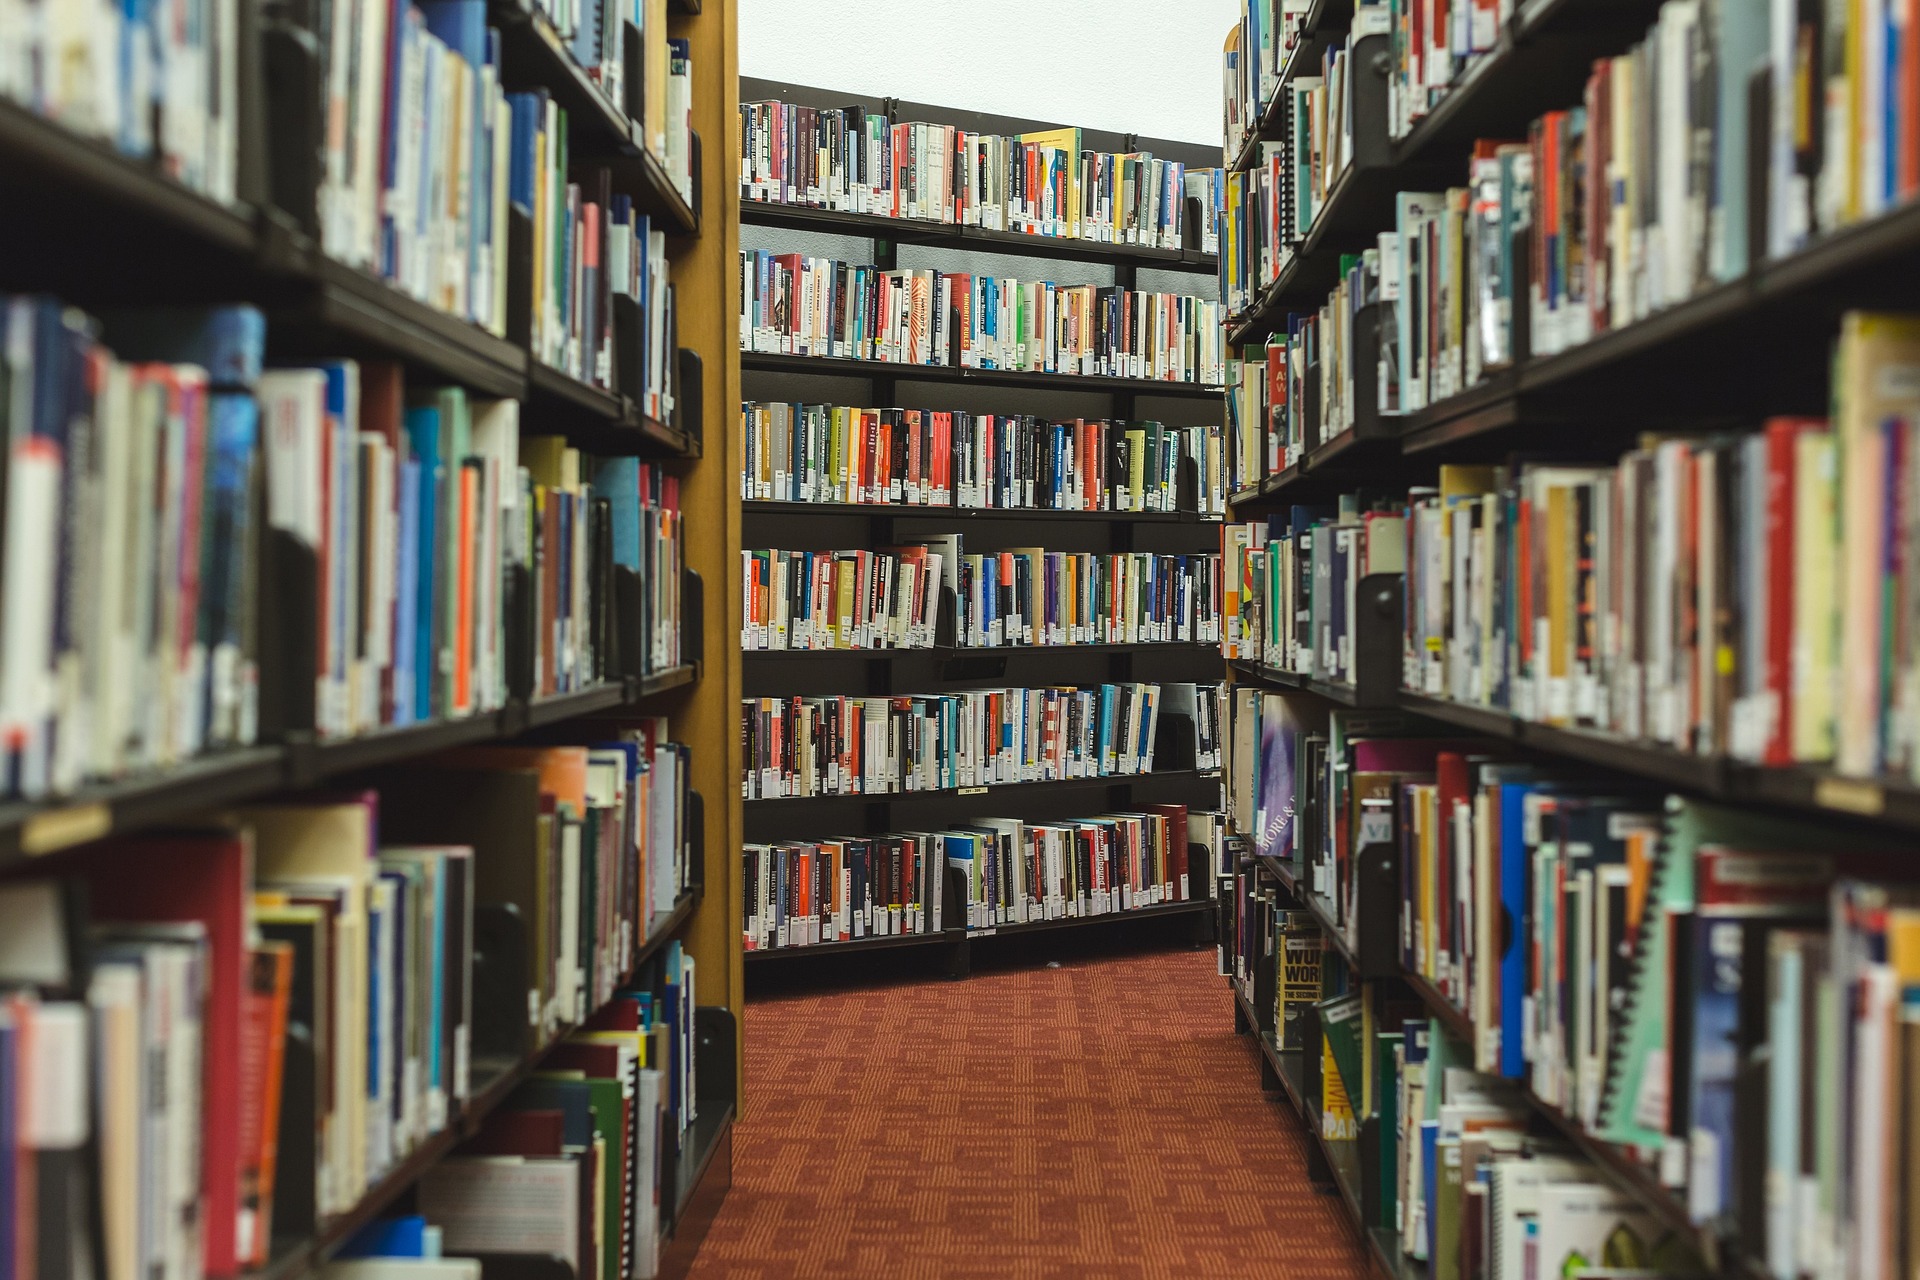 Many books on shelves in a library